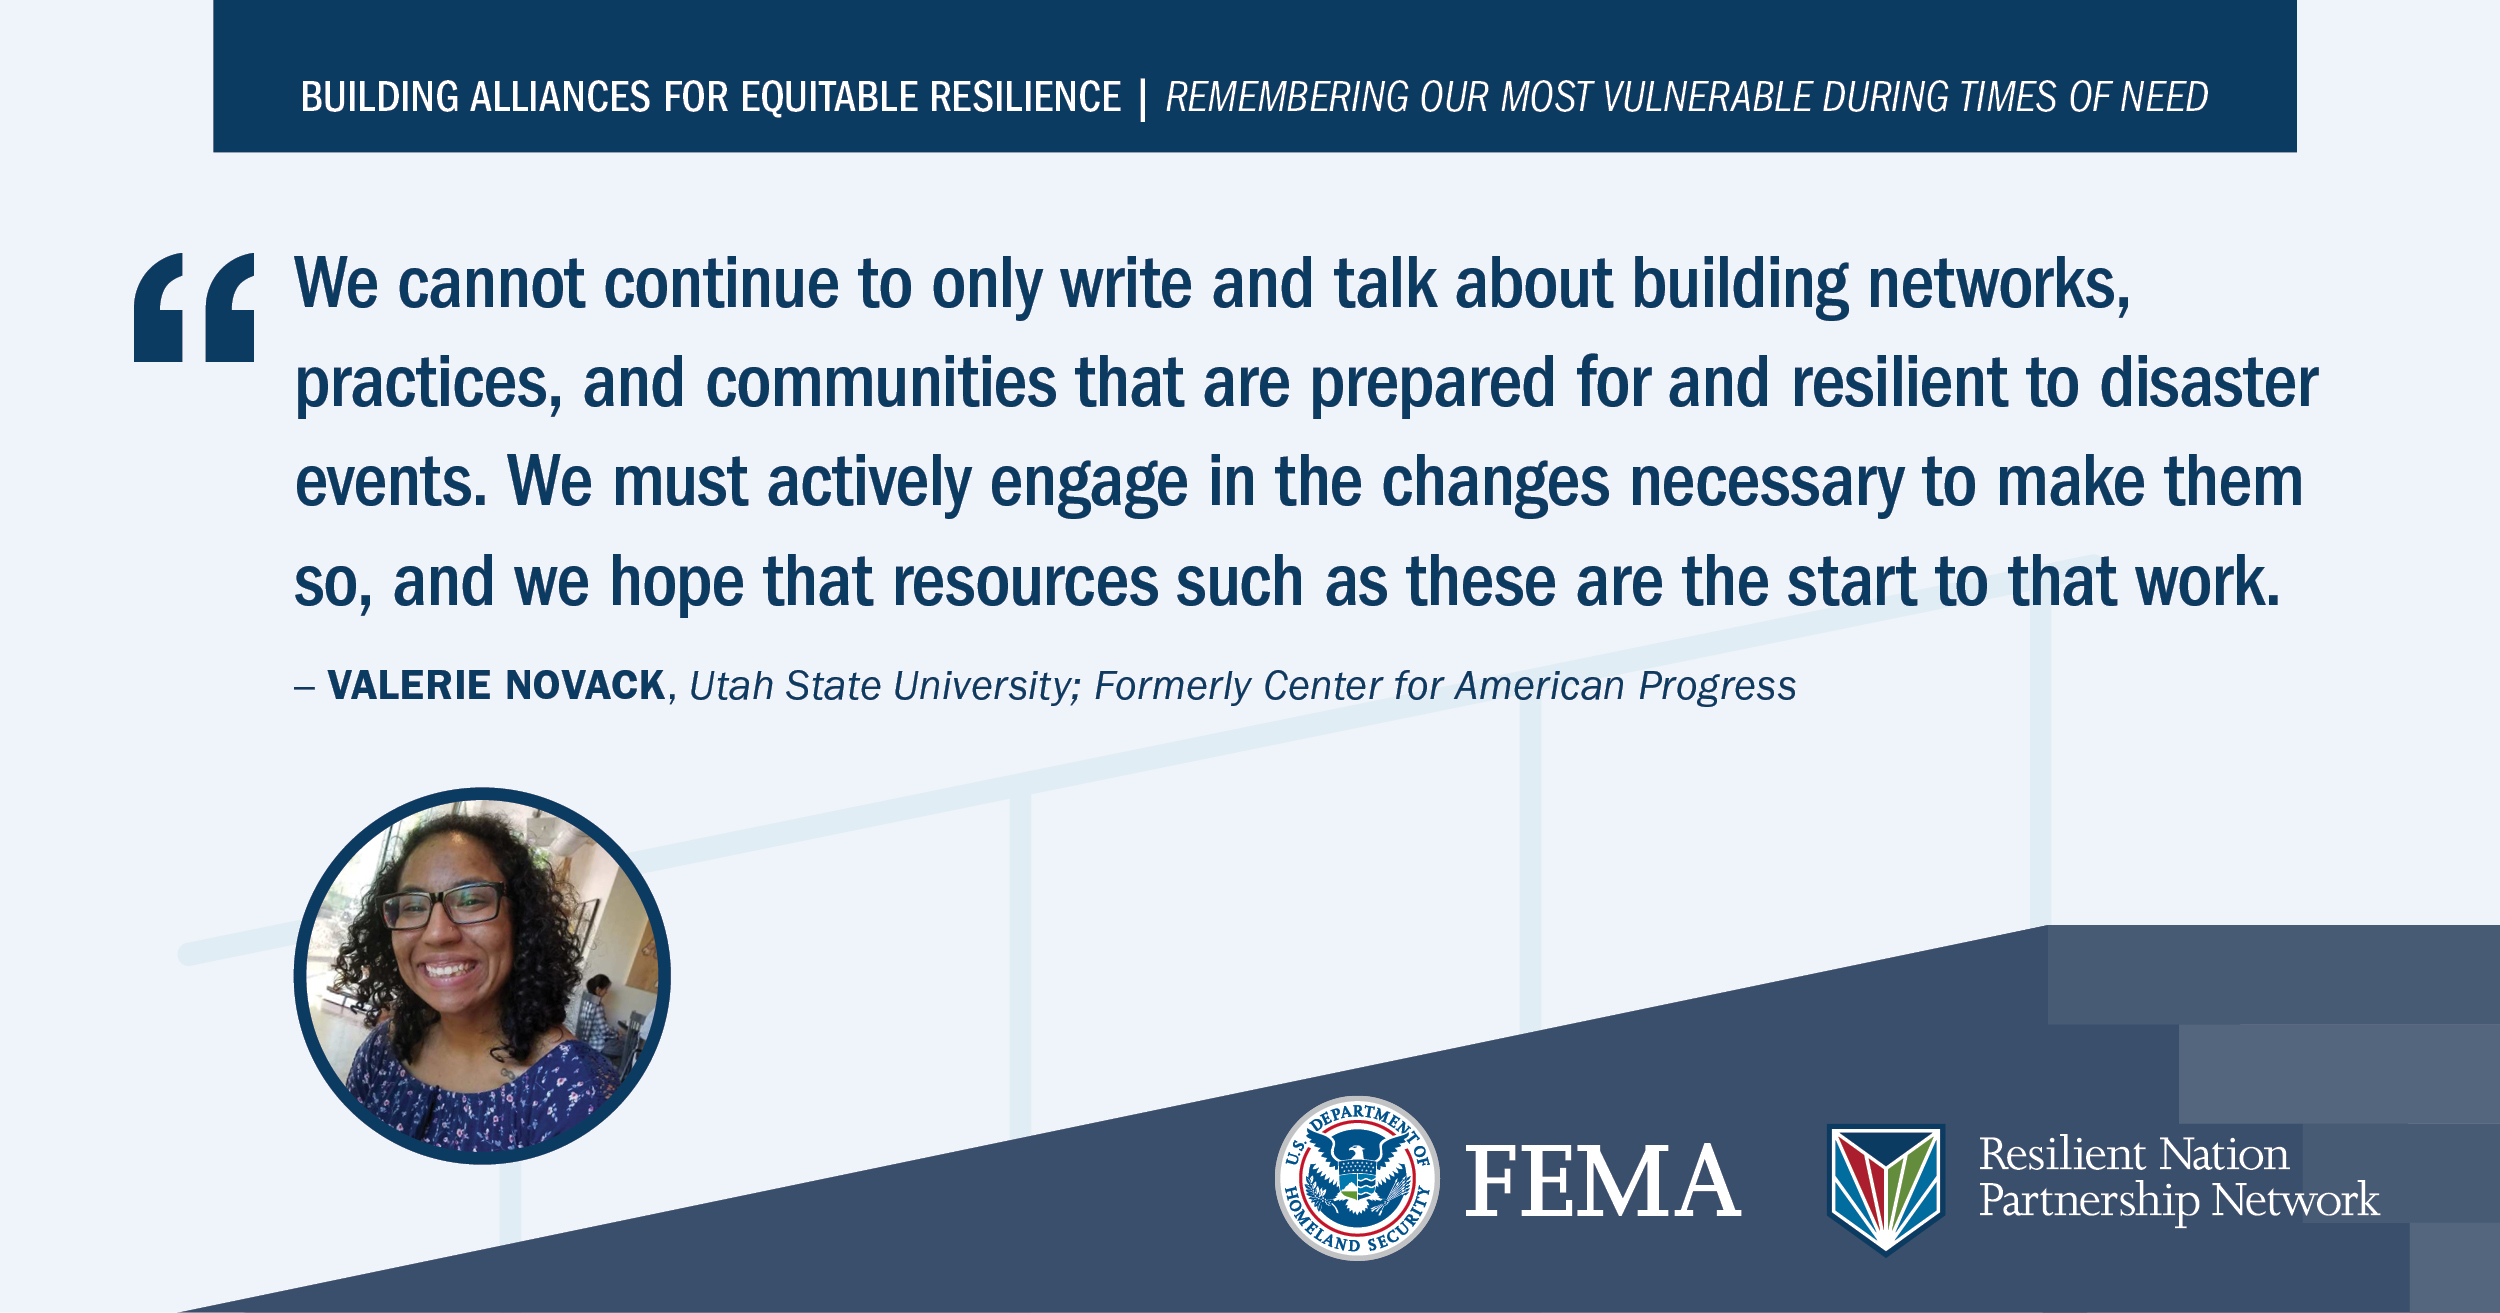 “We cannot continue to only write and talk about building networks, practices, and communities that are prepared for and resilient to disaster events. We must actively engage in the changes necessary to make them so, and we hope that resources such as these are the start to that work.” -Valerie Novack, Utah State University; Formerly Center for American Progress